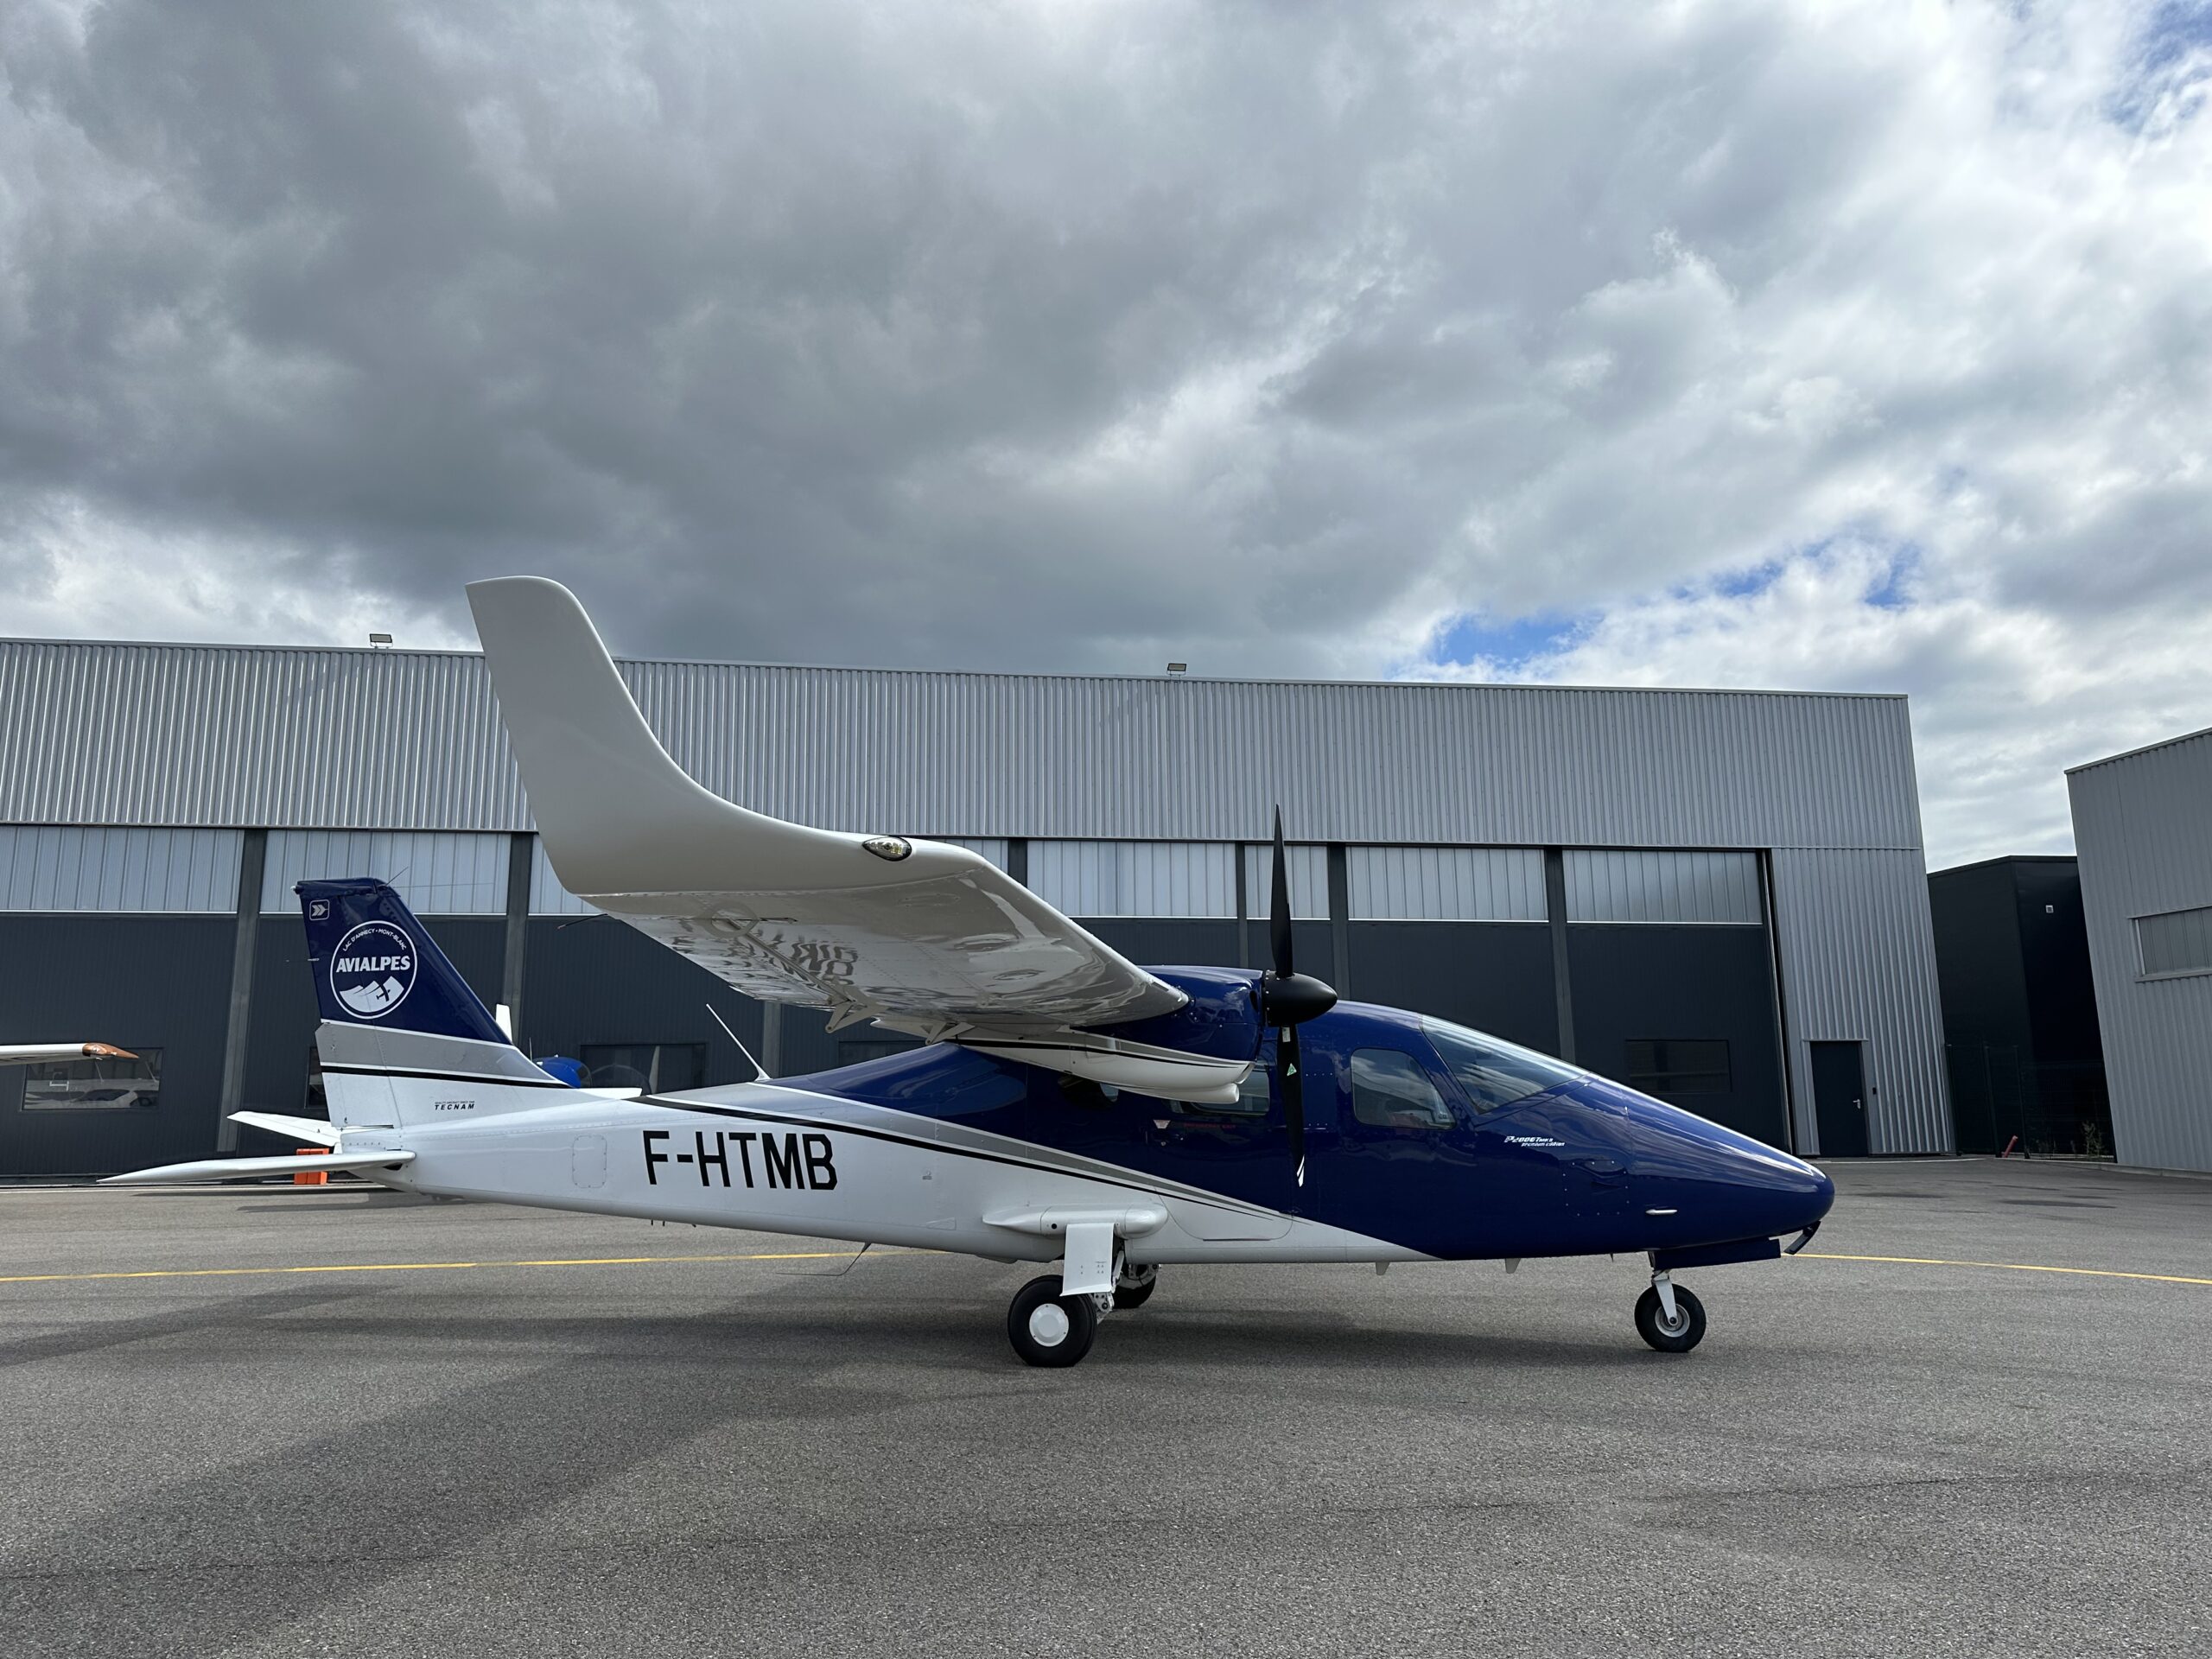 2021 Tecnam P2006T Multi Engine Piston Aircraft For Sale (F-HTMB) From Aviation Sales International On AvPay aircraft exterior right side